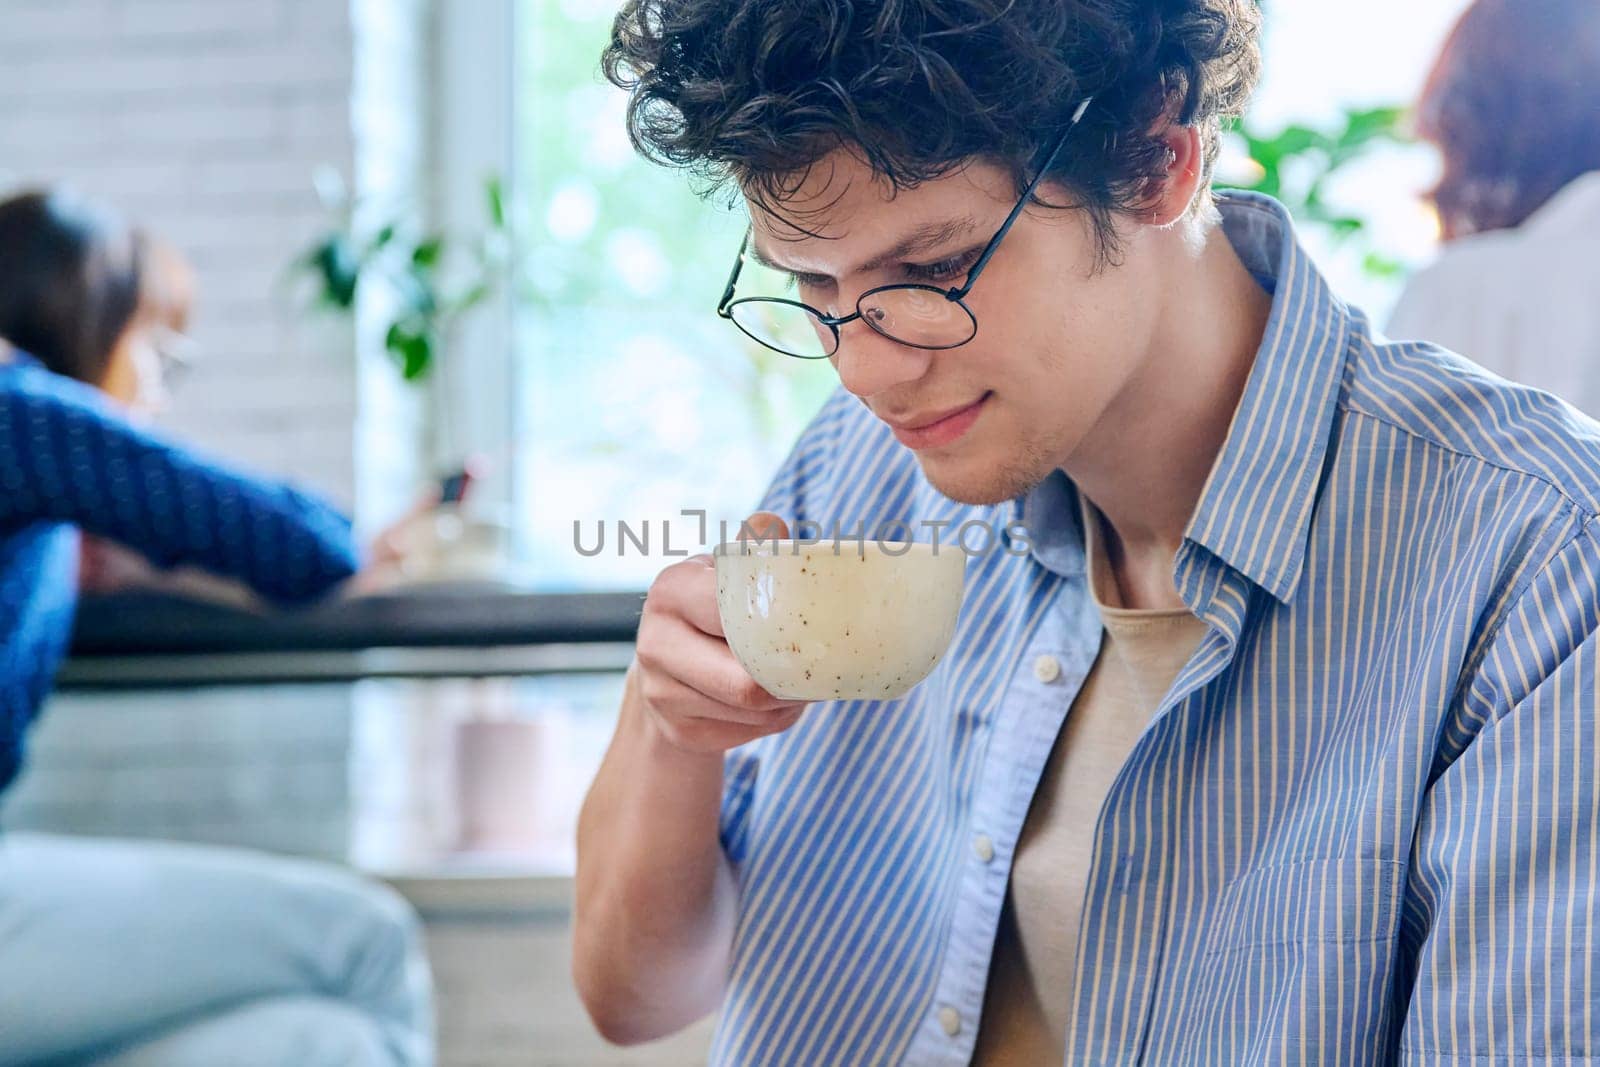 Handsome young curly-haired guy drinking cup of coffee in coffee shop. Young male college student in glasses enjoying cappuccino. Coffee culture, lifestyle, youth, people concept